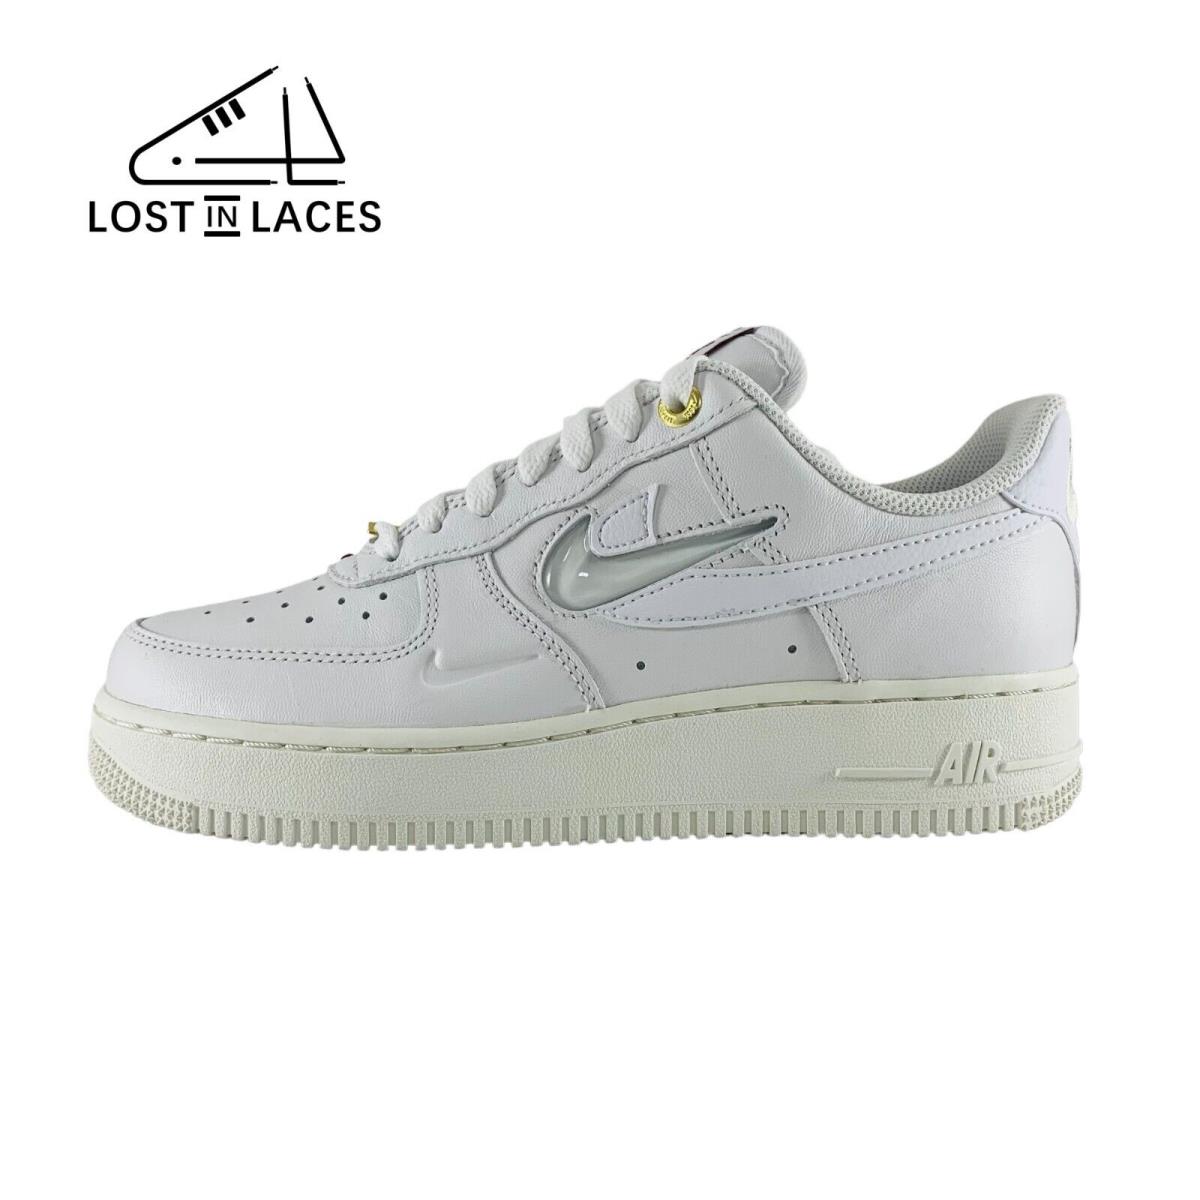 Nike Air Force 1 `07 Premium History of Logos Sneakers Shoes Women`s Sizes